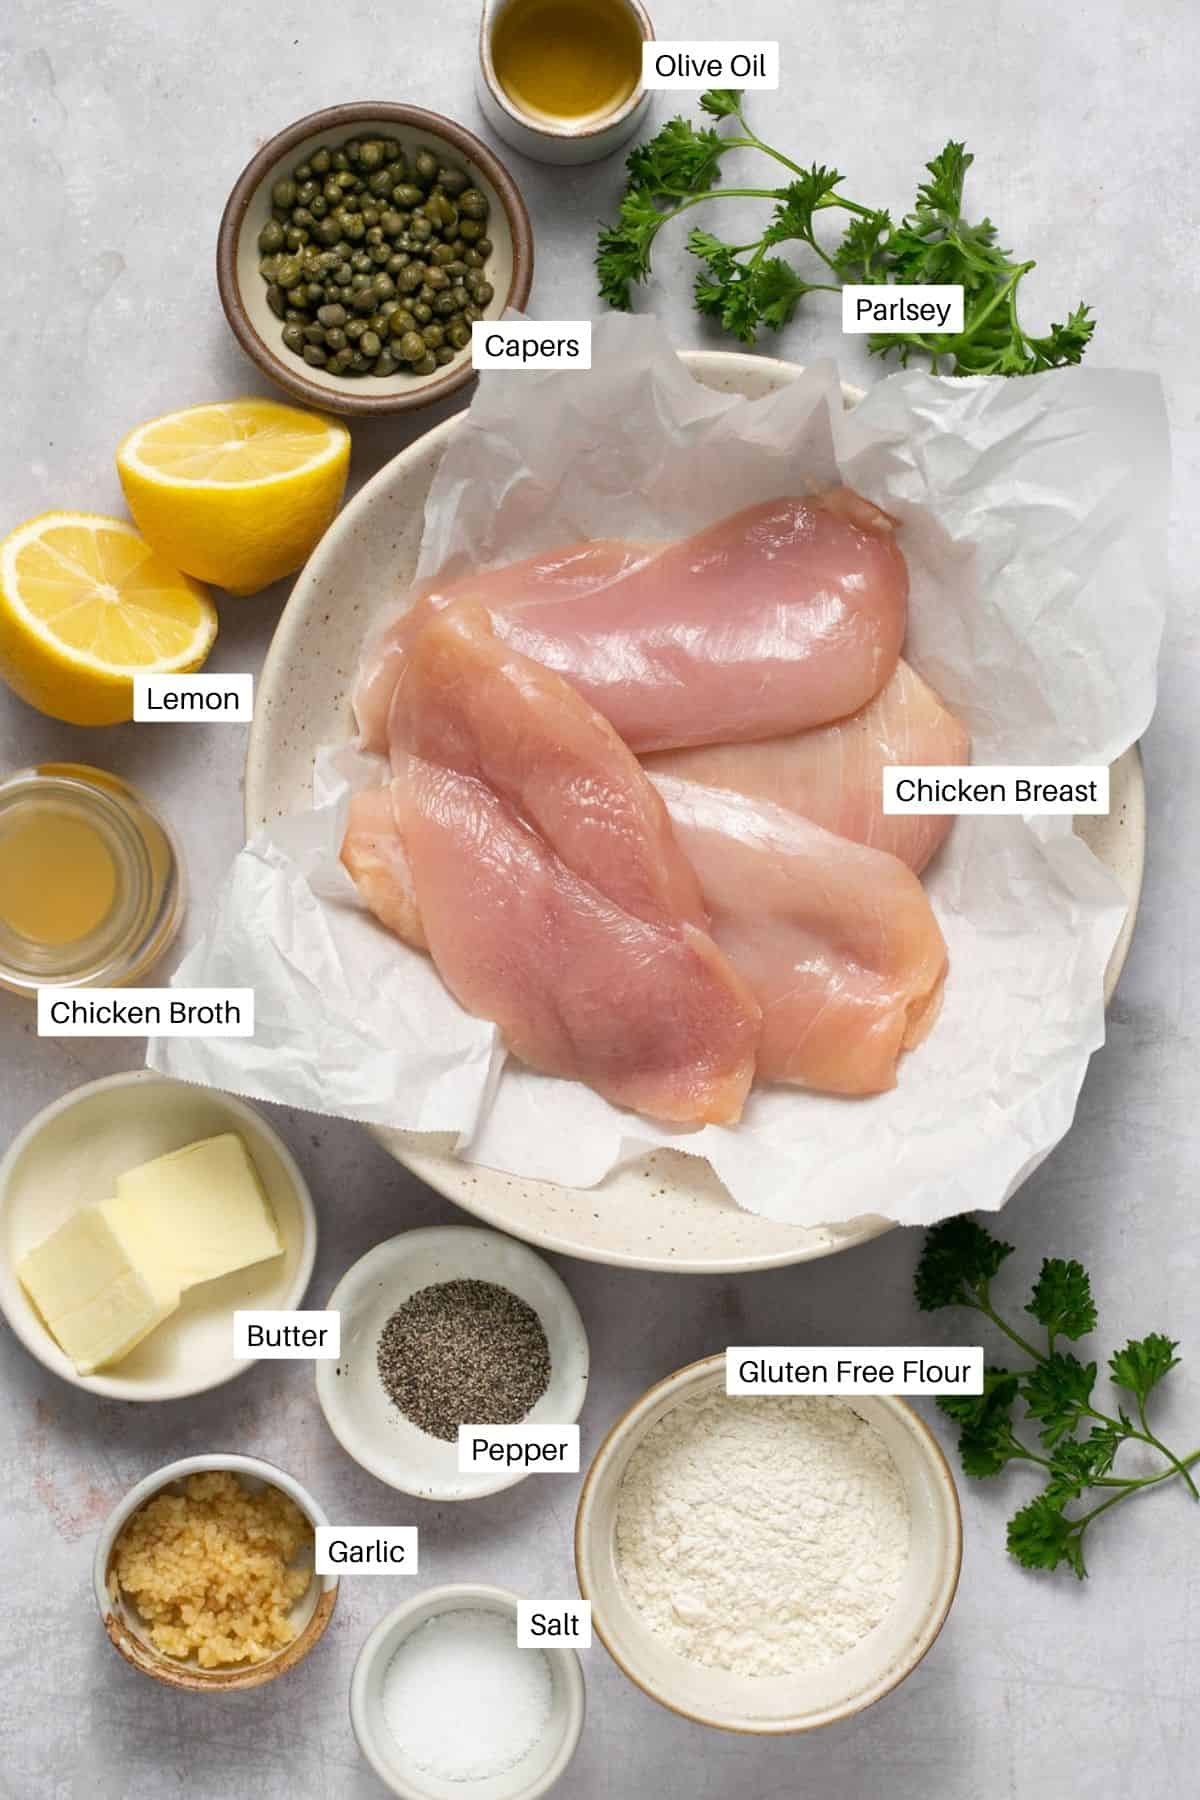 Piccata ingredients including broth, capers, and gluten-free flour.